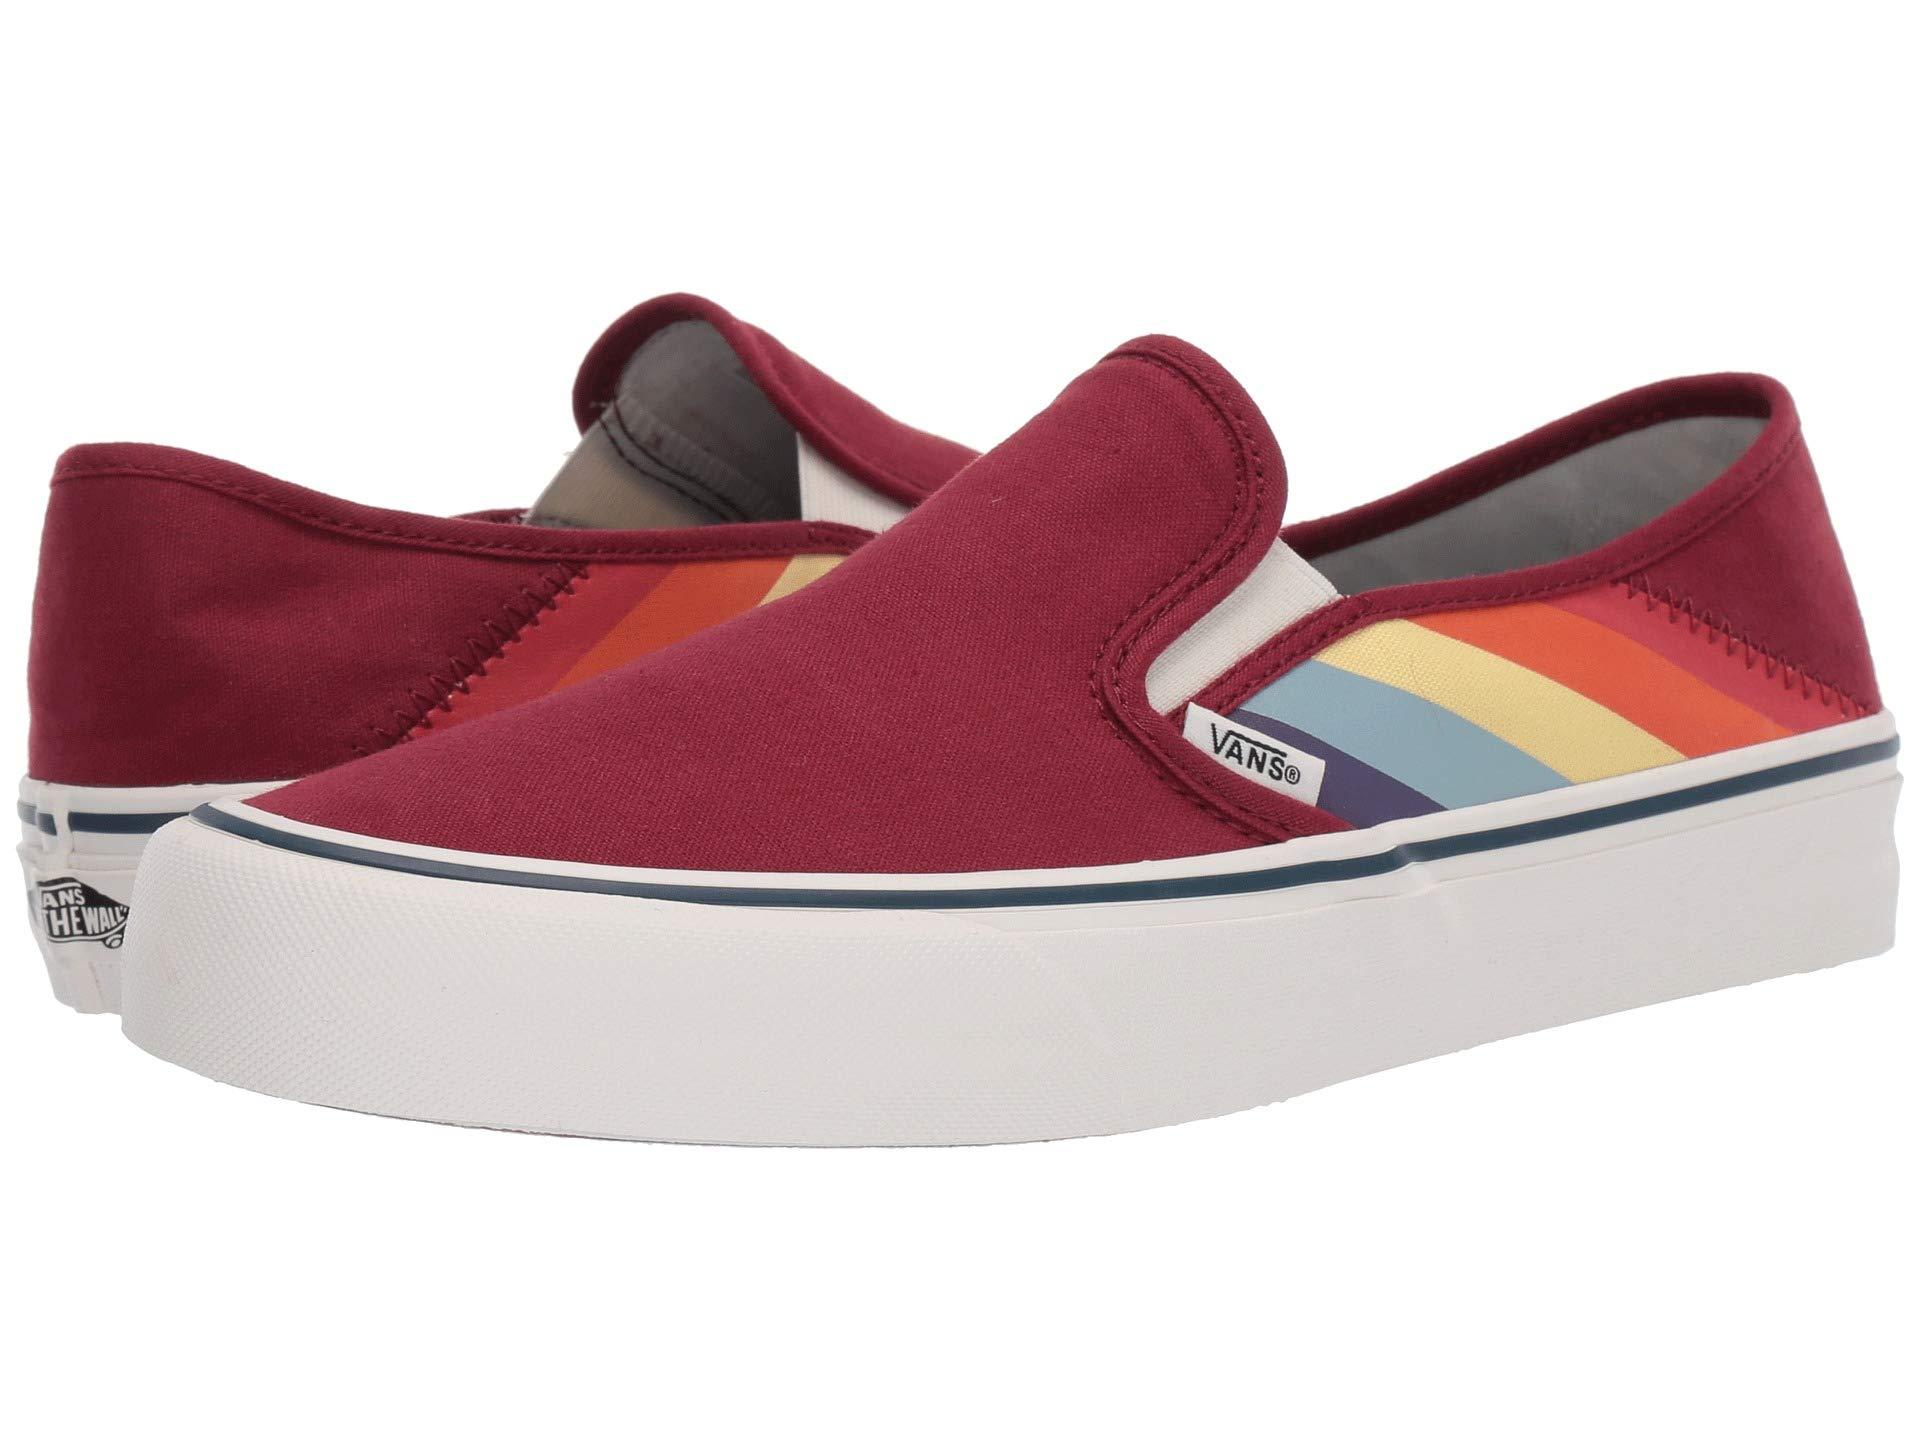 Vans Canvas Rad Rainbow Slip-on Sf Womens Shoes in Red | Lyst